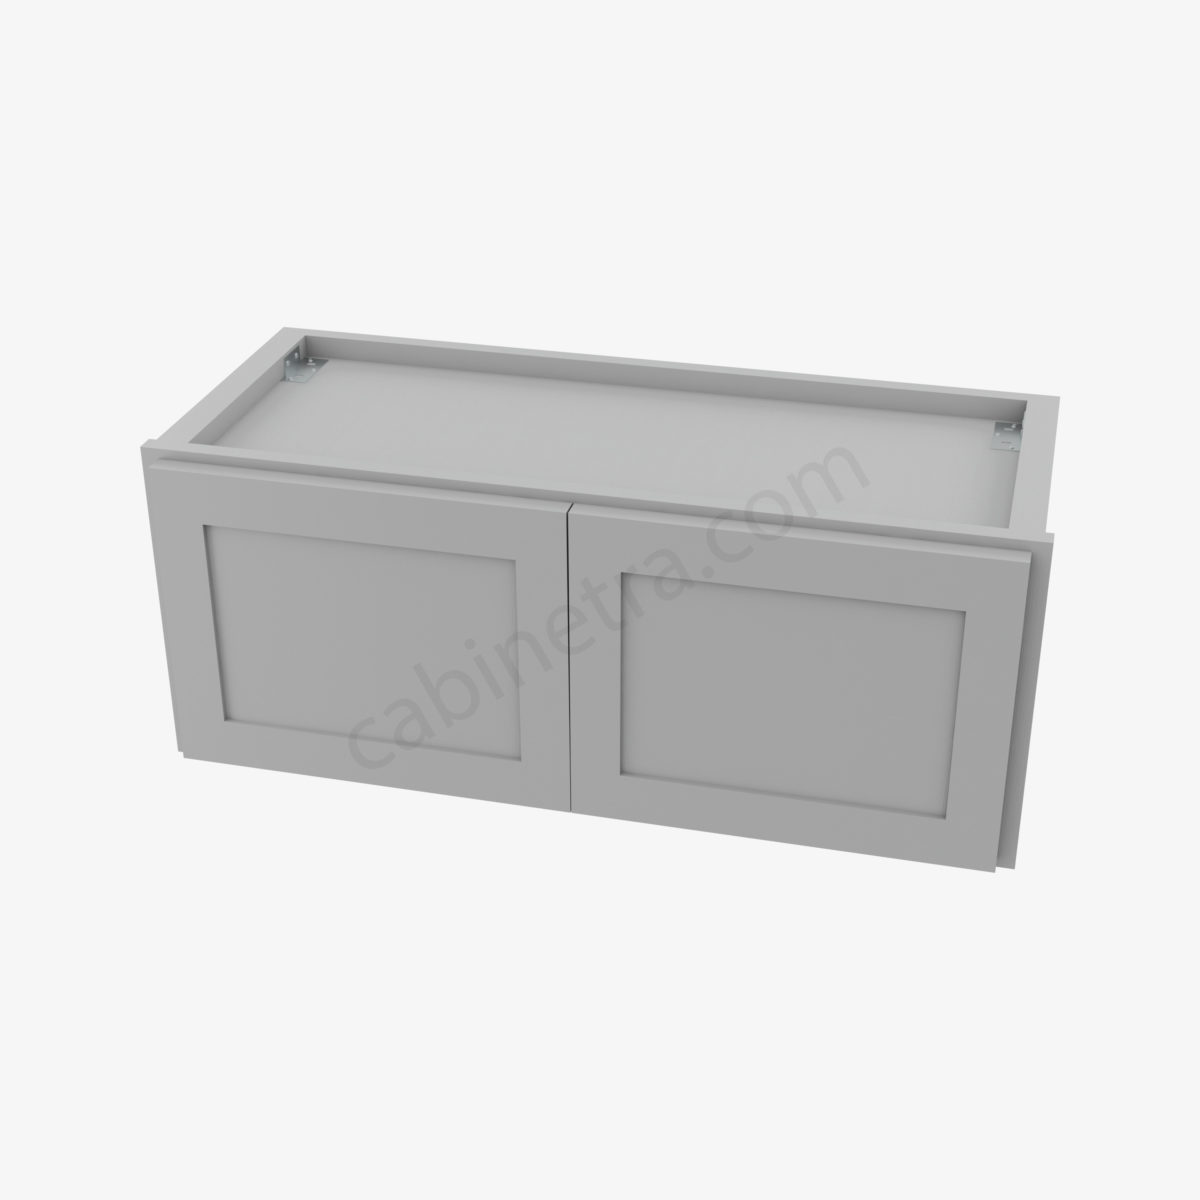 AB W3012B 3 Forevermark Lait Gray Shaker Cabinetra scaled